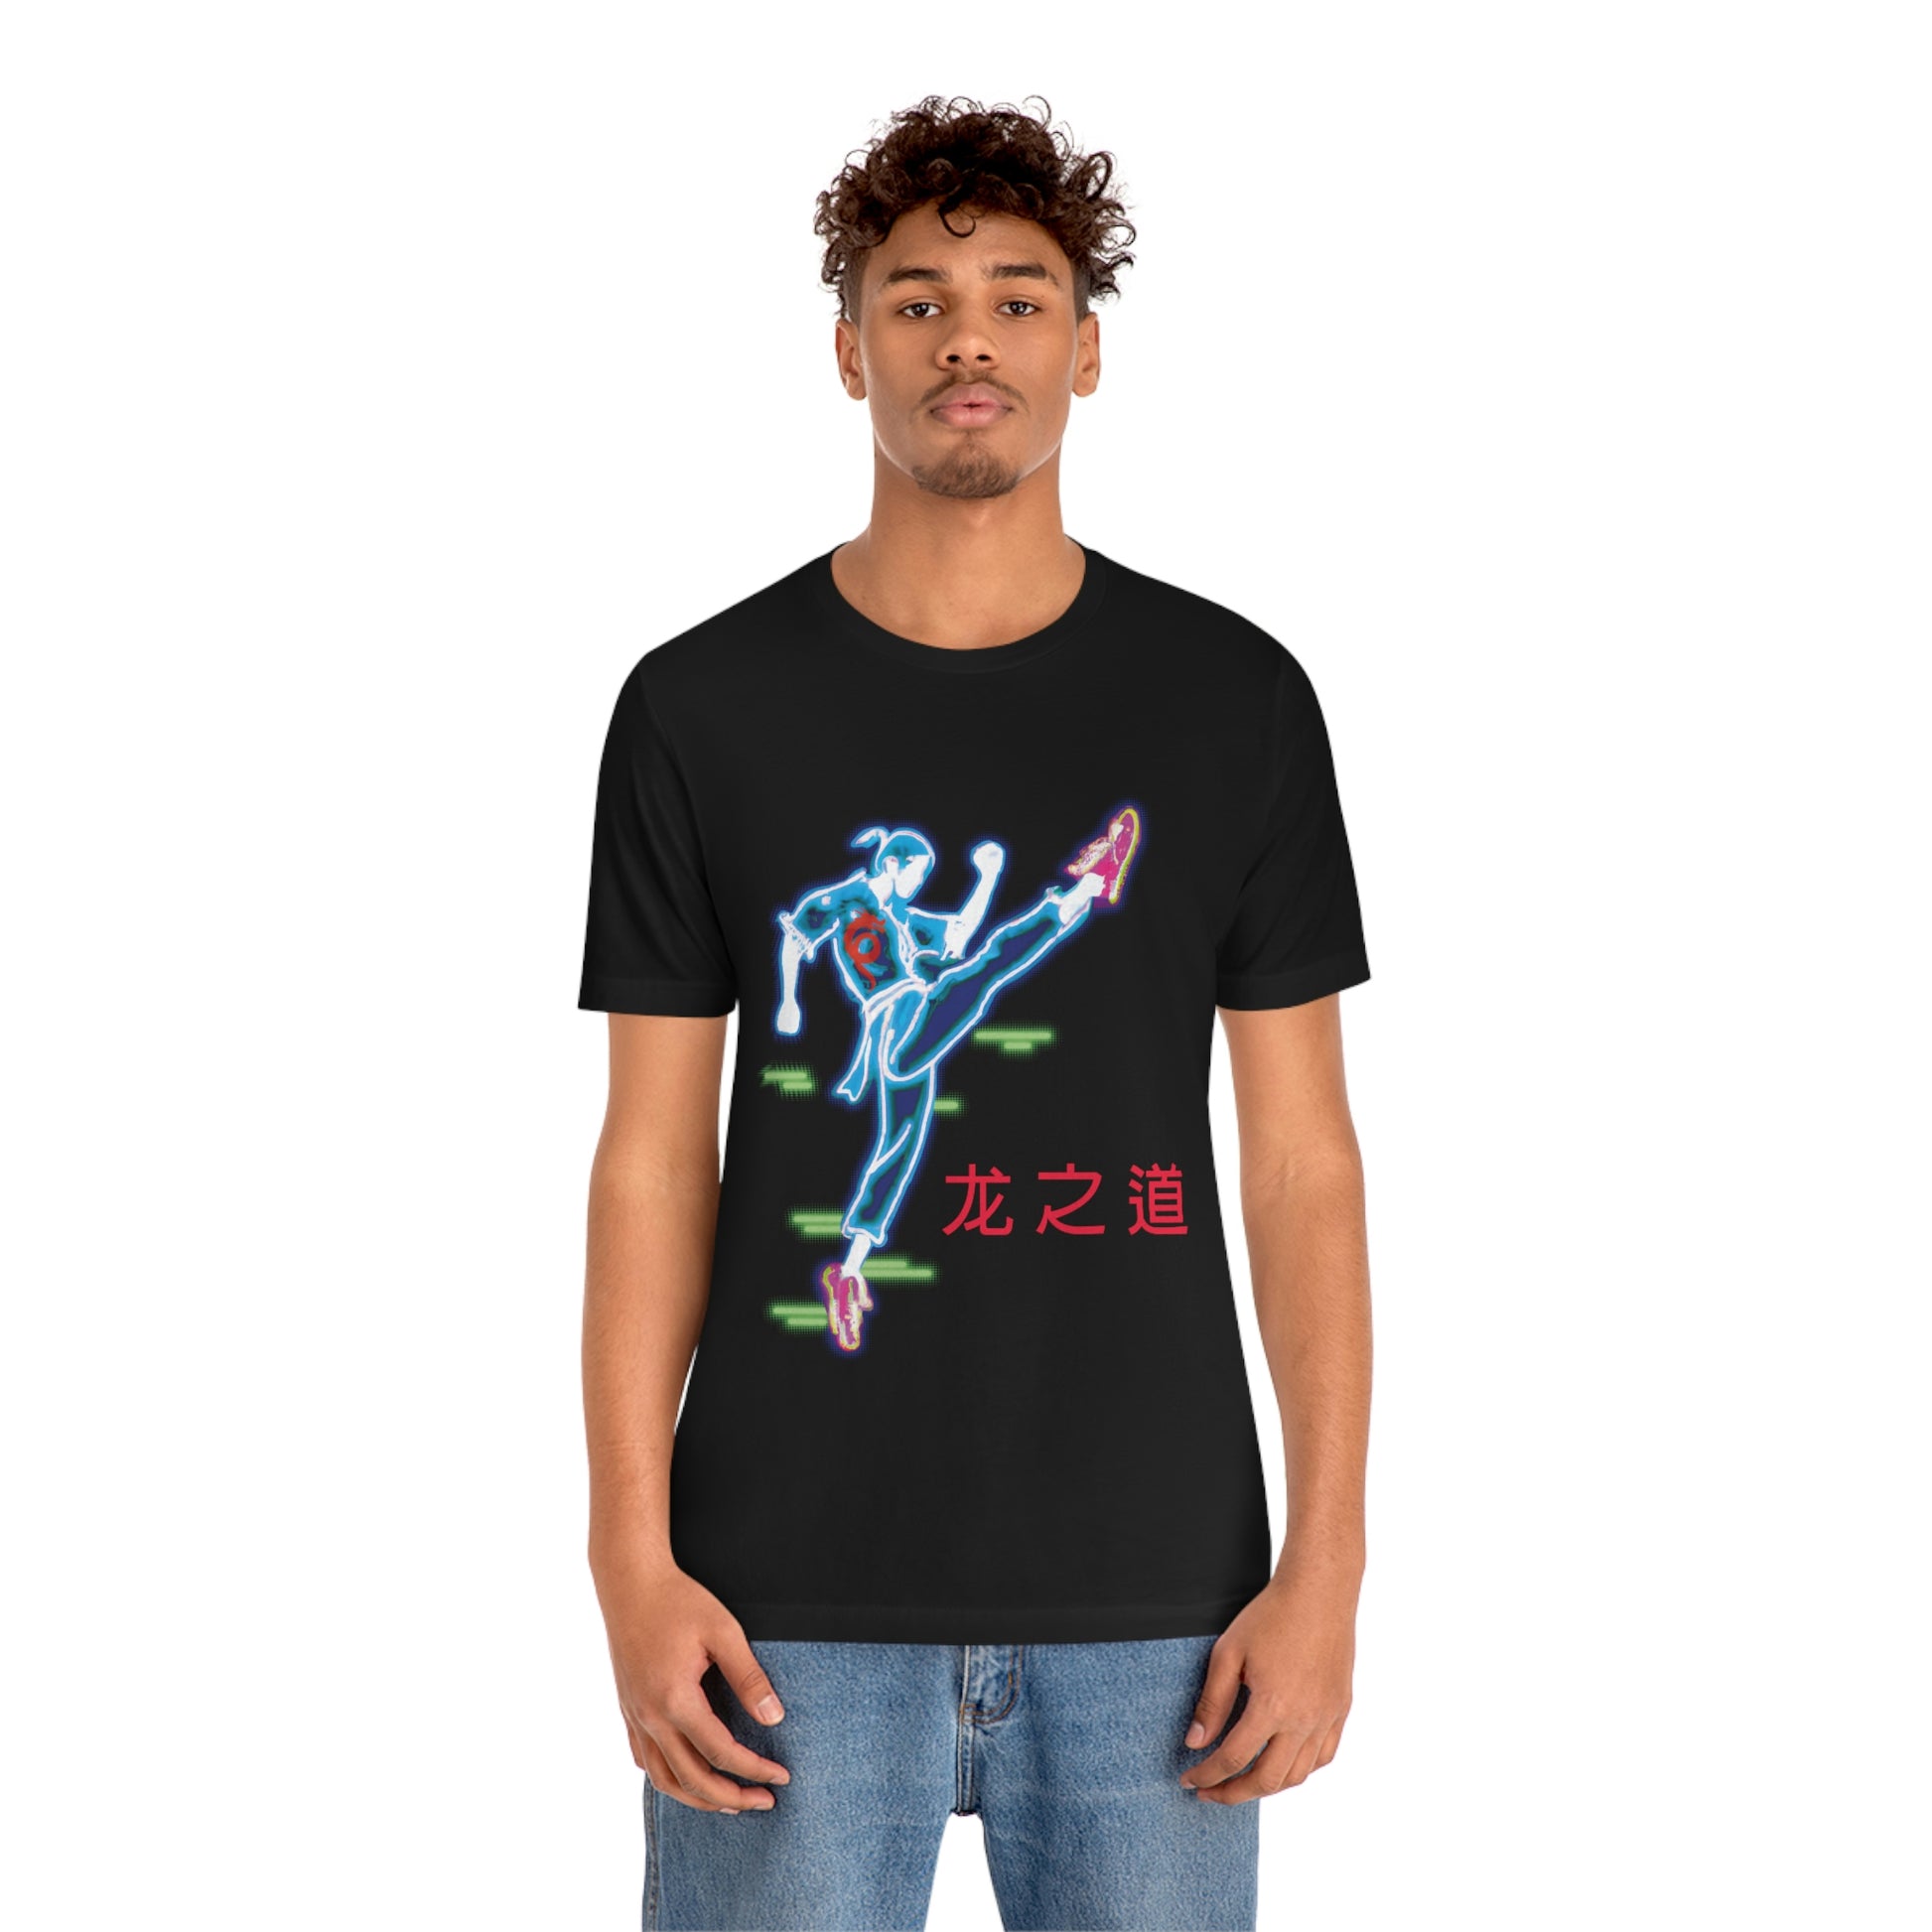 Black T-Shirt featuring a neon-esque martial arts fighter with red Cantonese text stating 'Way of the Dragon' from the TEQNEON Neolific collection, called CYBERFU